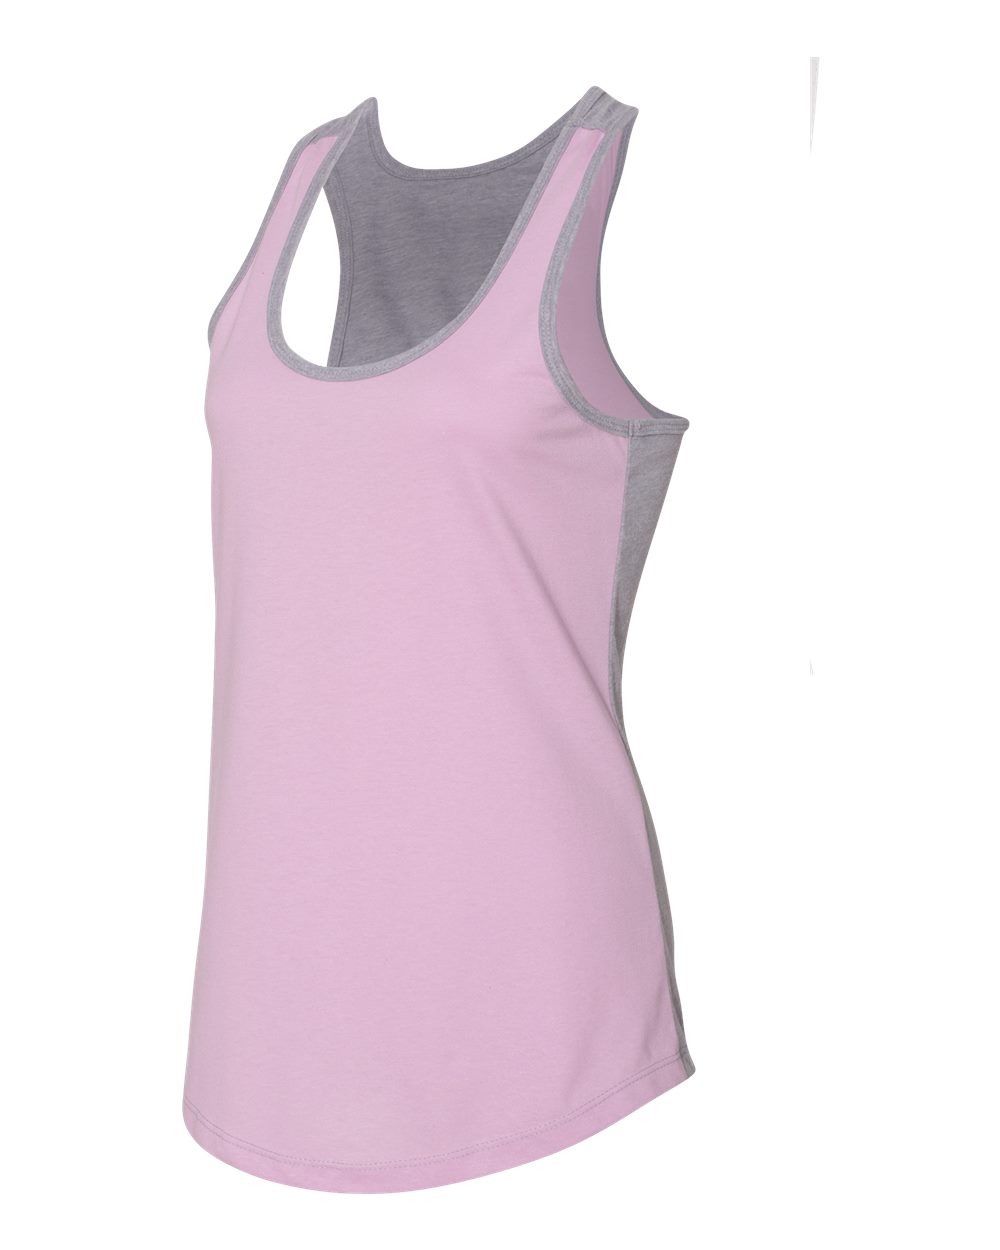 click to view Lilac/ Heather Grey